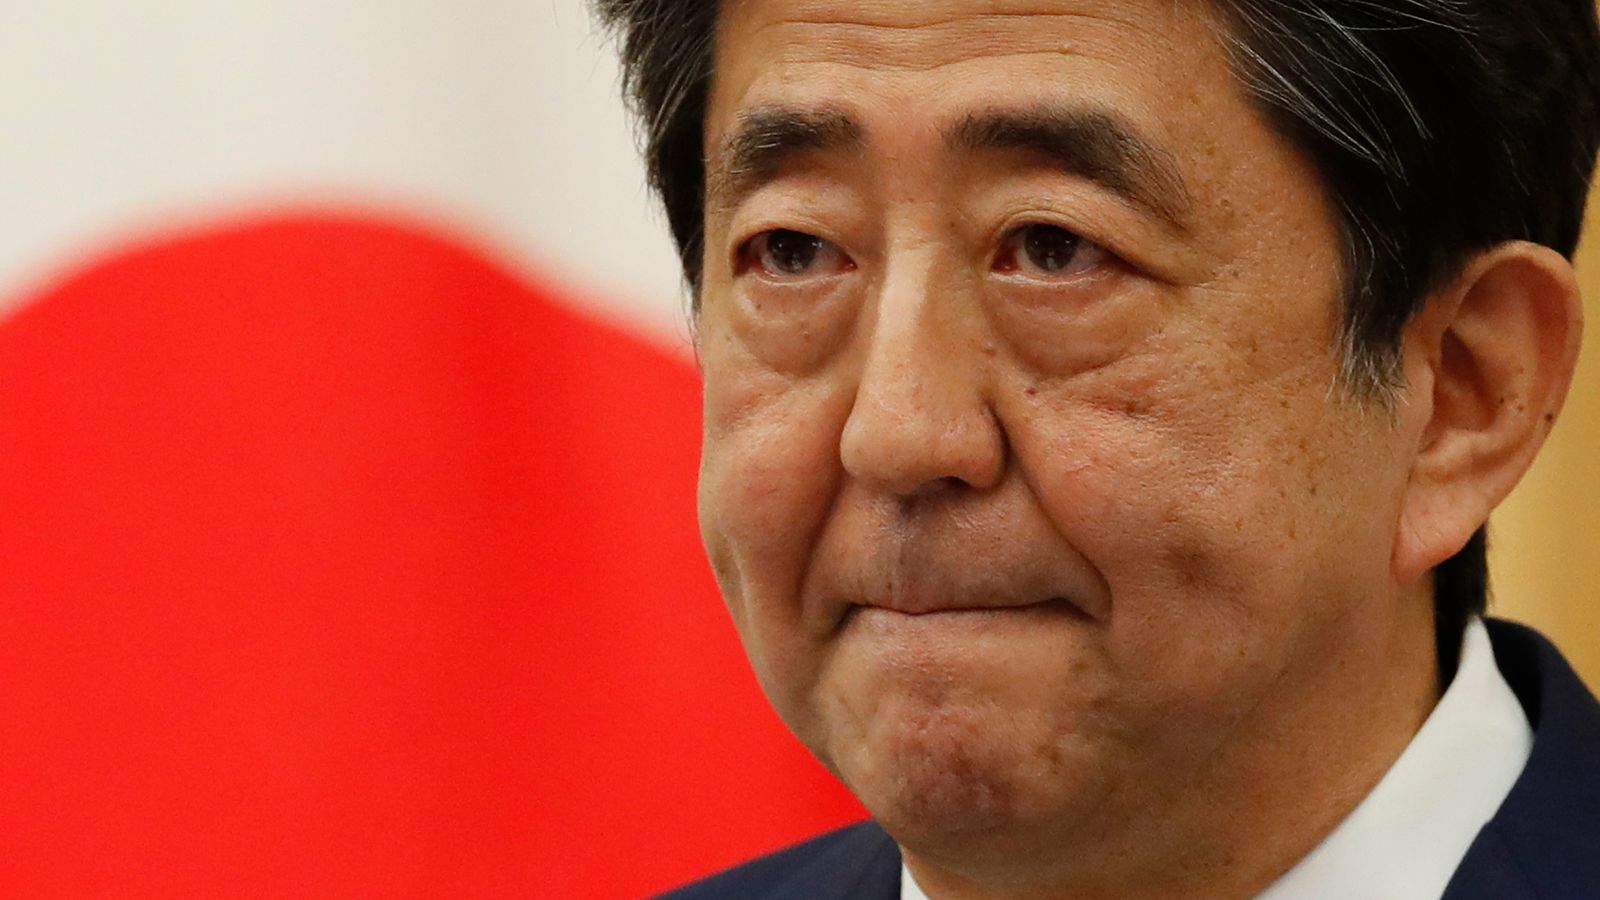 Japan's Prime Minister Shinzo Abe speaks at a news conference in Tokyo, Japan May 25, 2020. REUTERS/Kim Kyung-Hoon/Pool